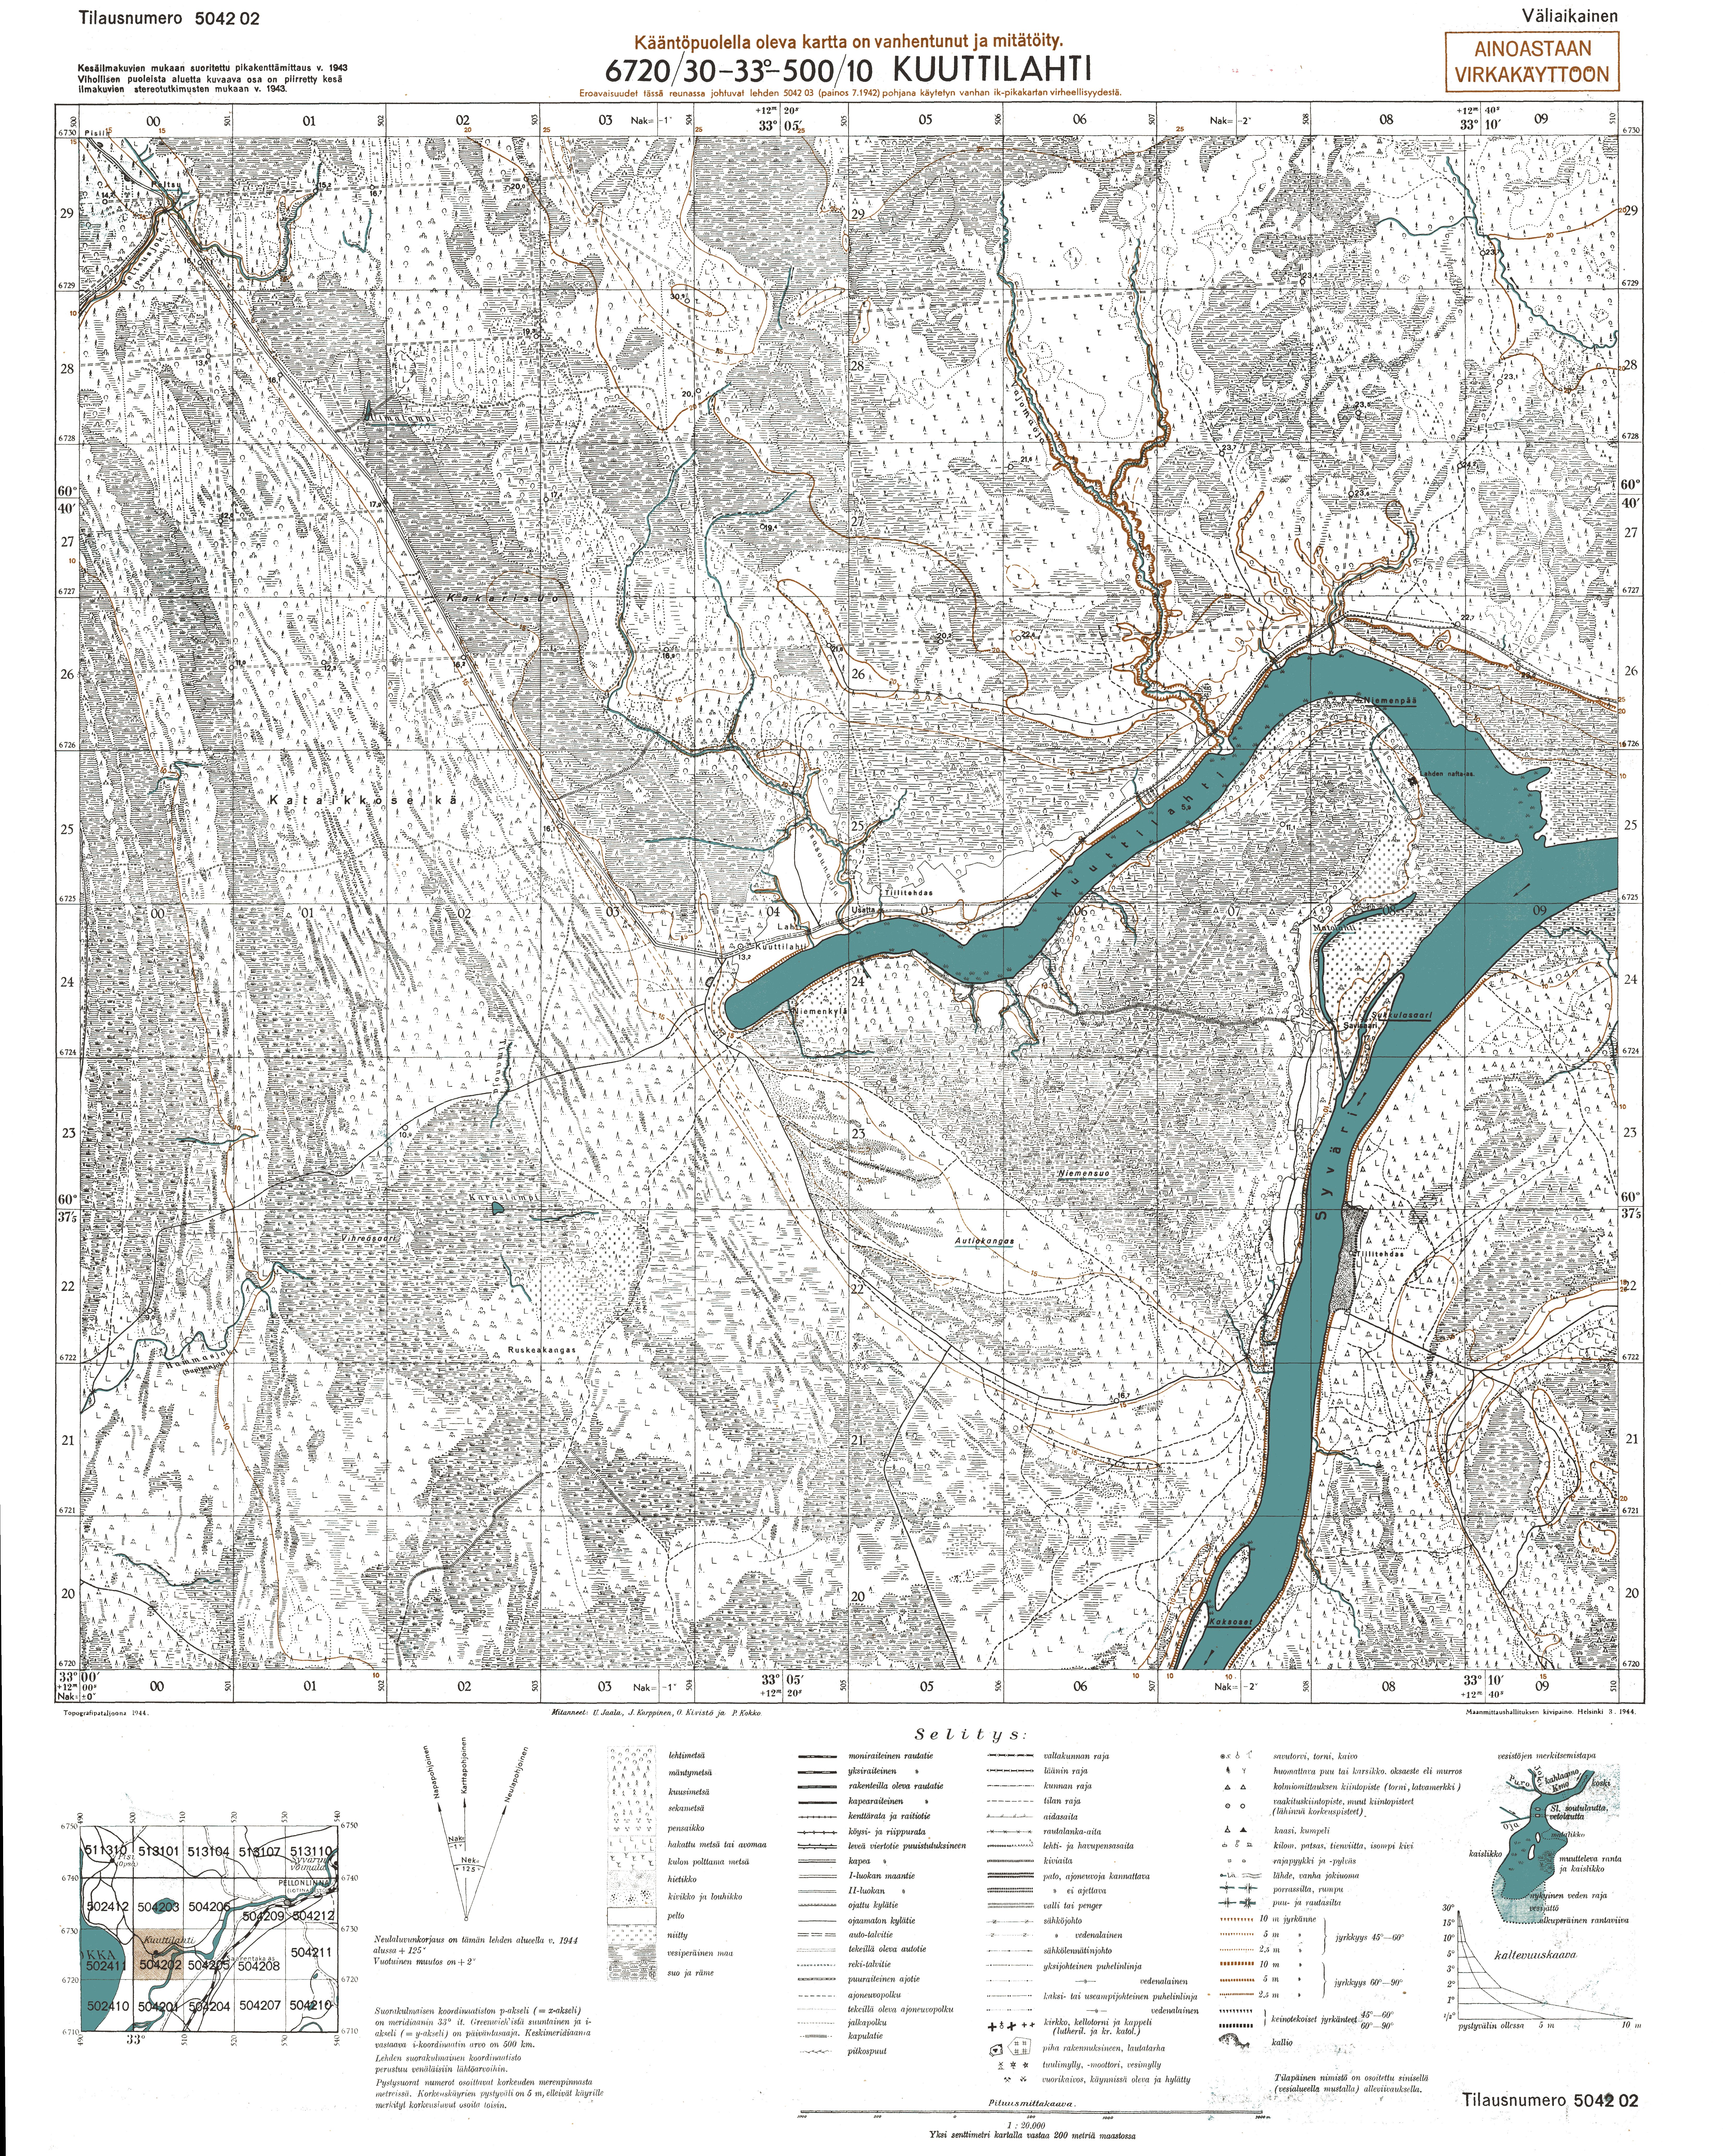 Lahtinskij Zaliv. Kuuttilahti. Topografikartta 504202. Topographic map from 1944. Use the zooming tool to explore in higher level of detail. Obtain as a quality print or high resolution image